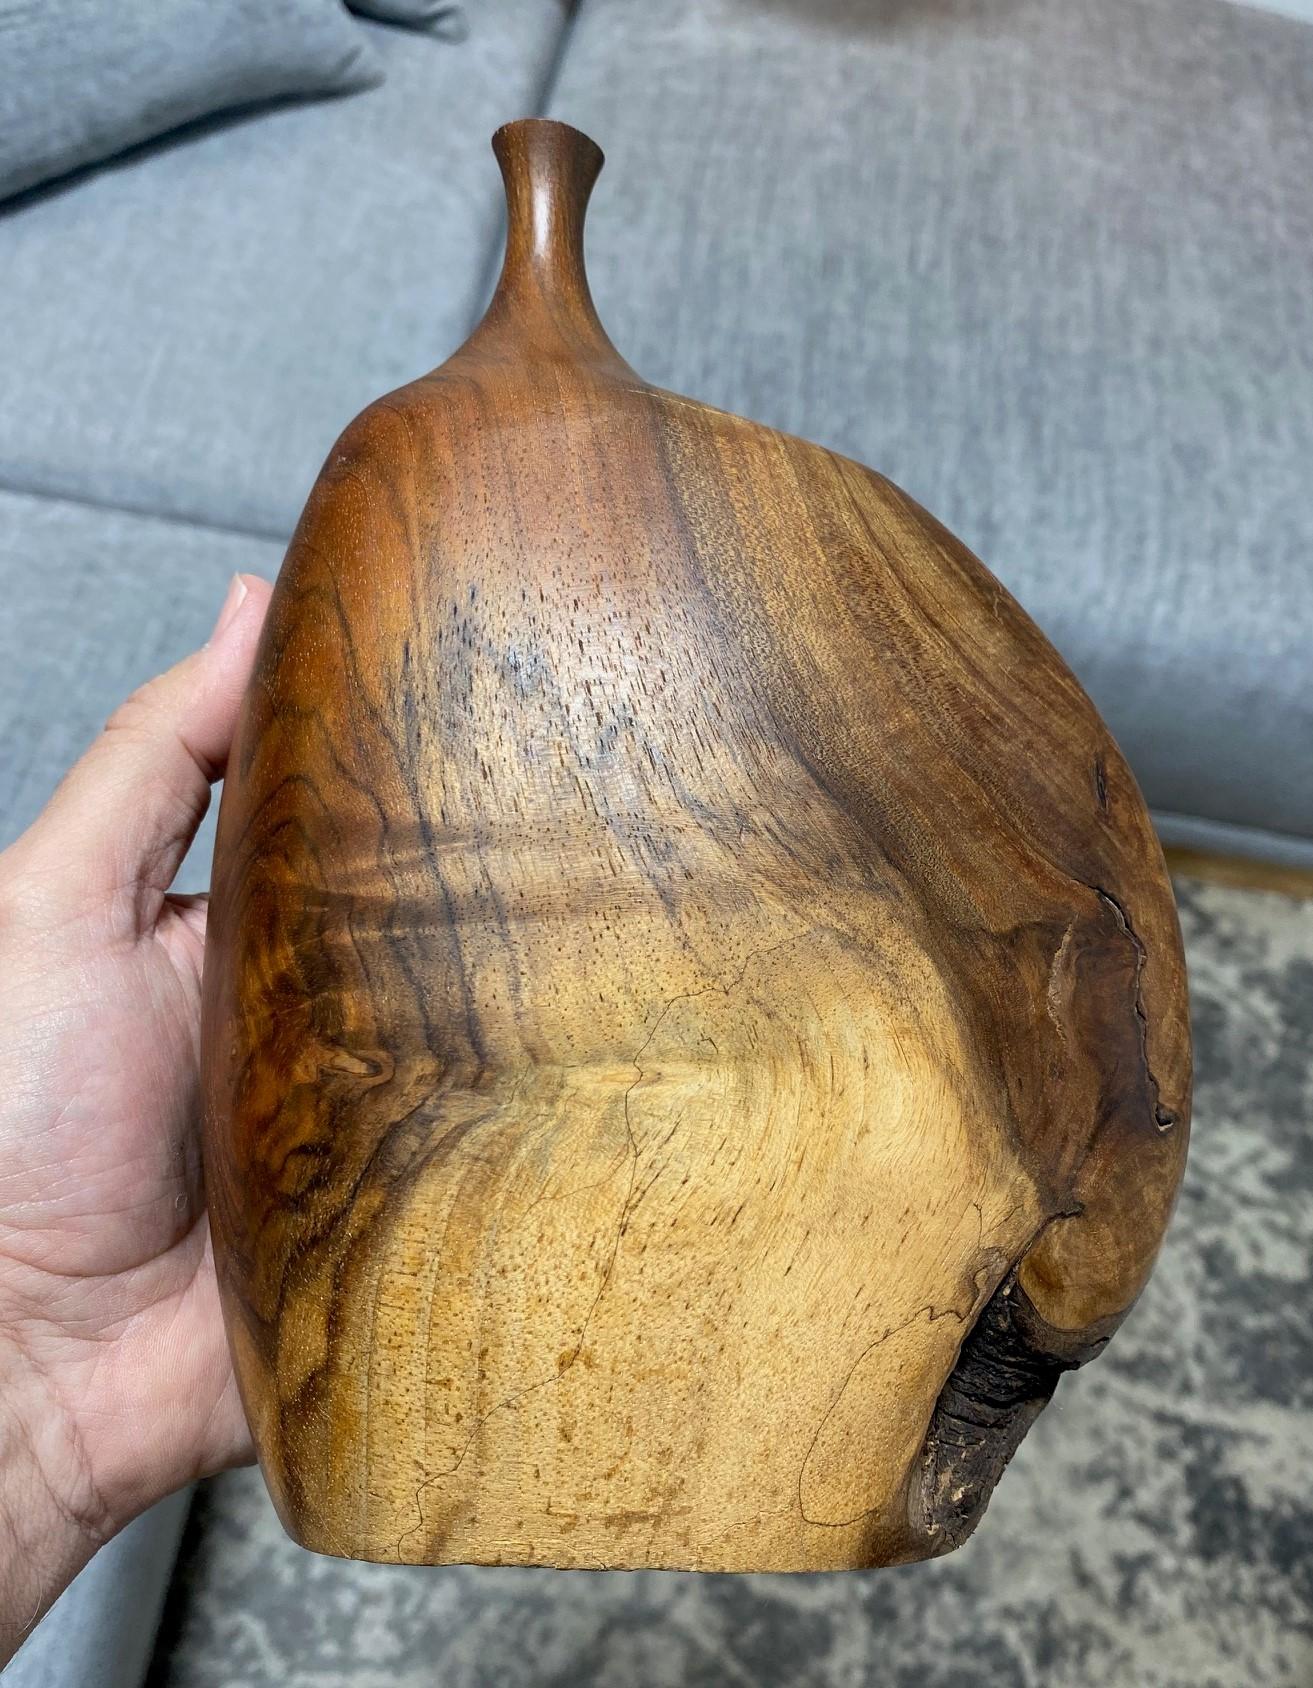 Doug Ayers Signed California Artist Organic Natural Wood Turned Weed Vase Vessel For Sale 5